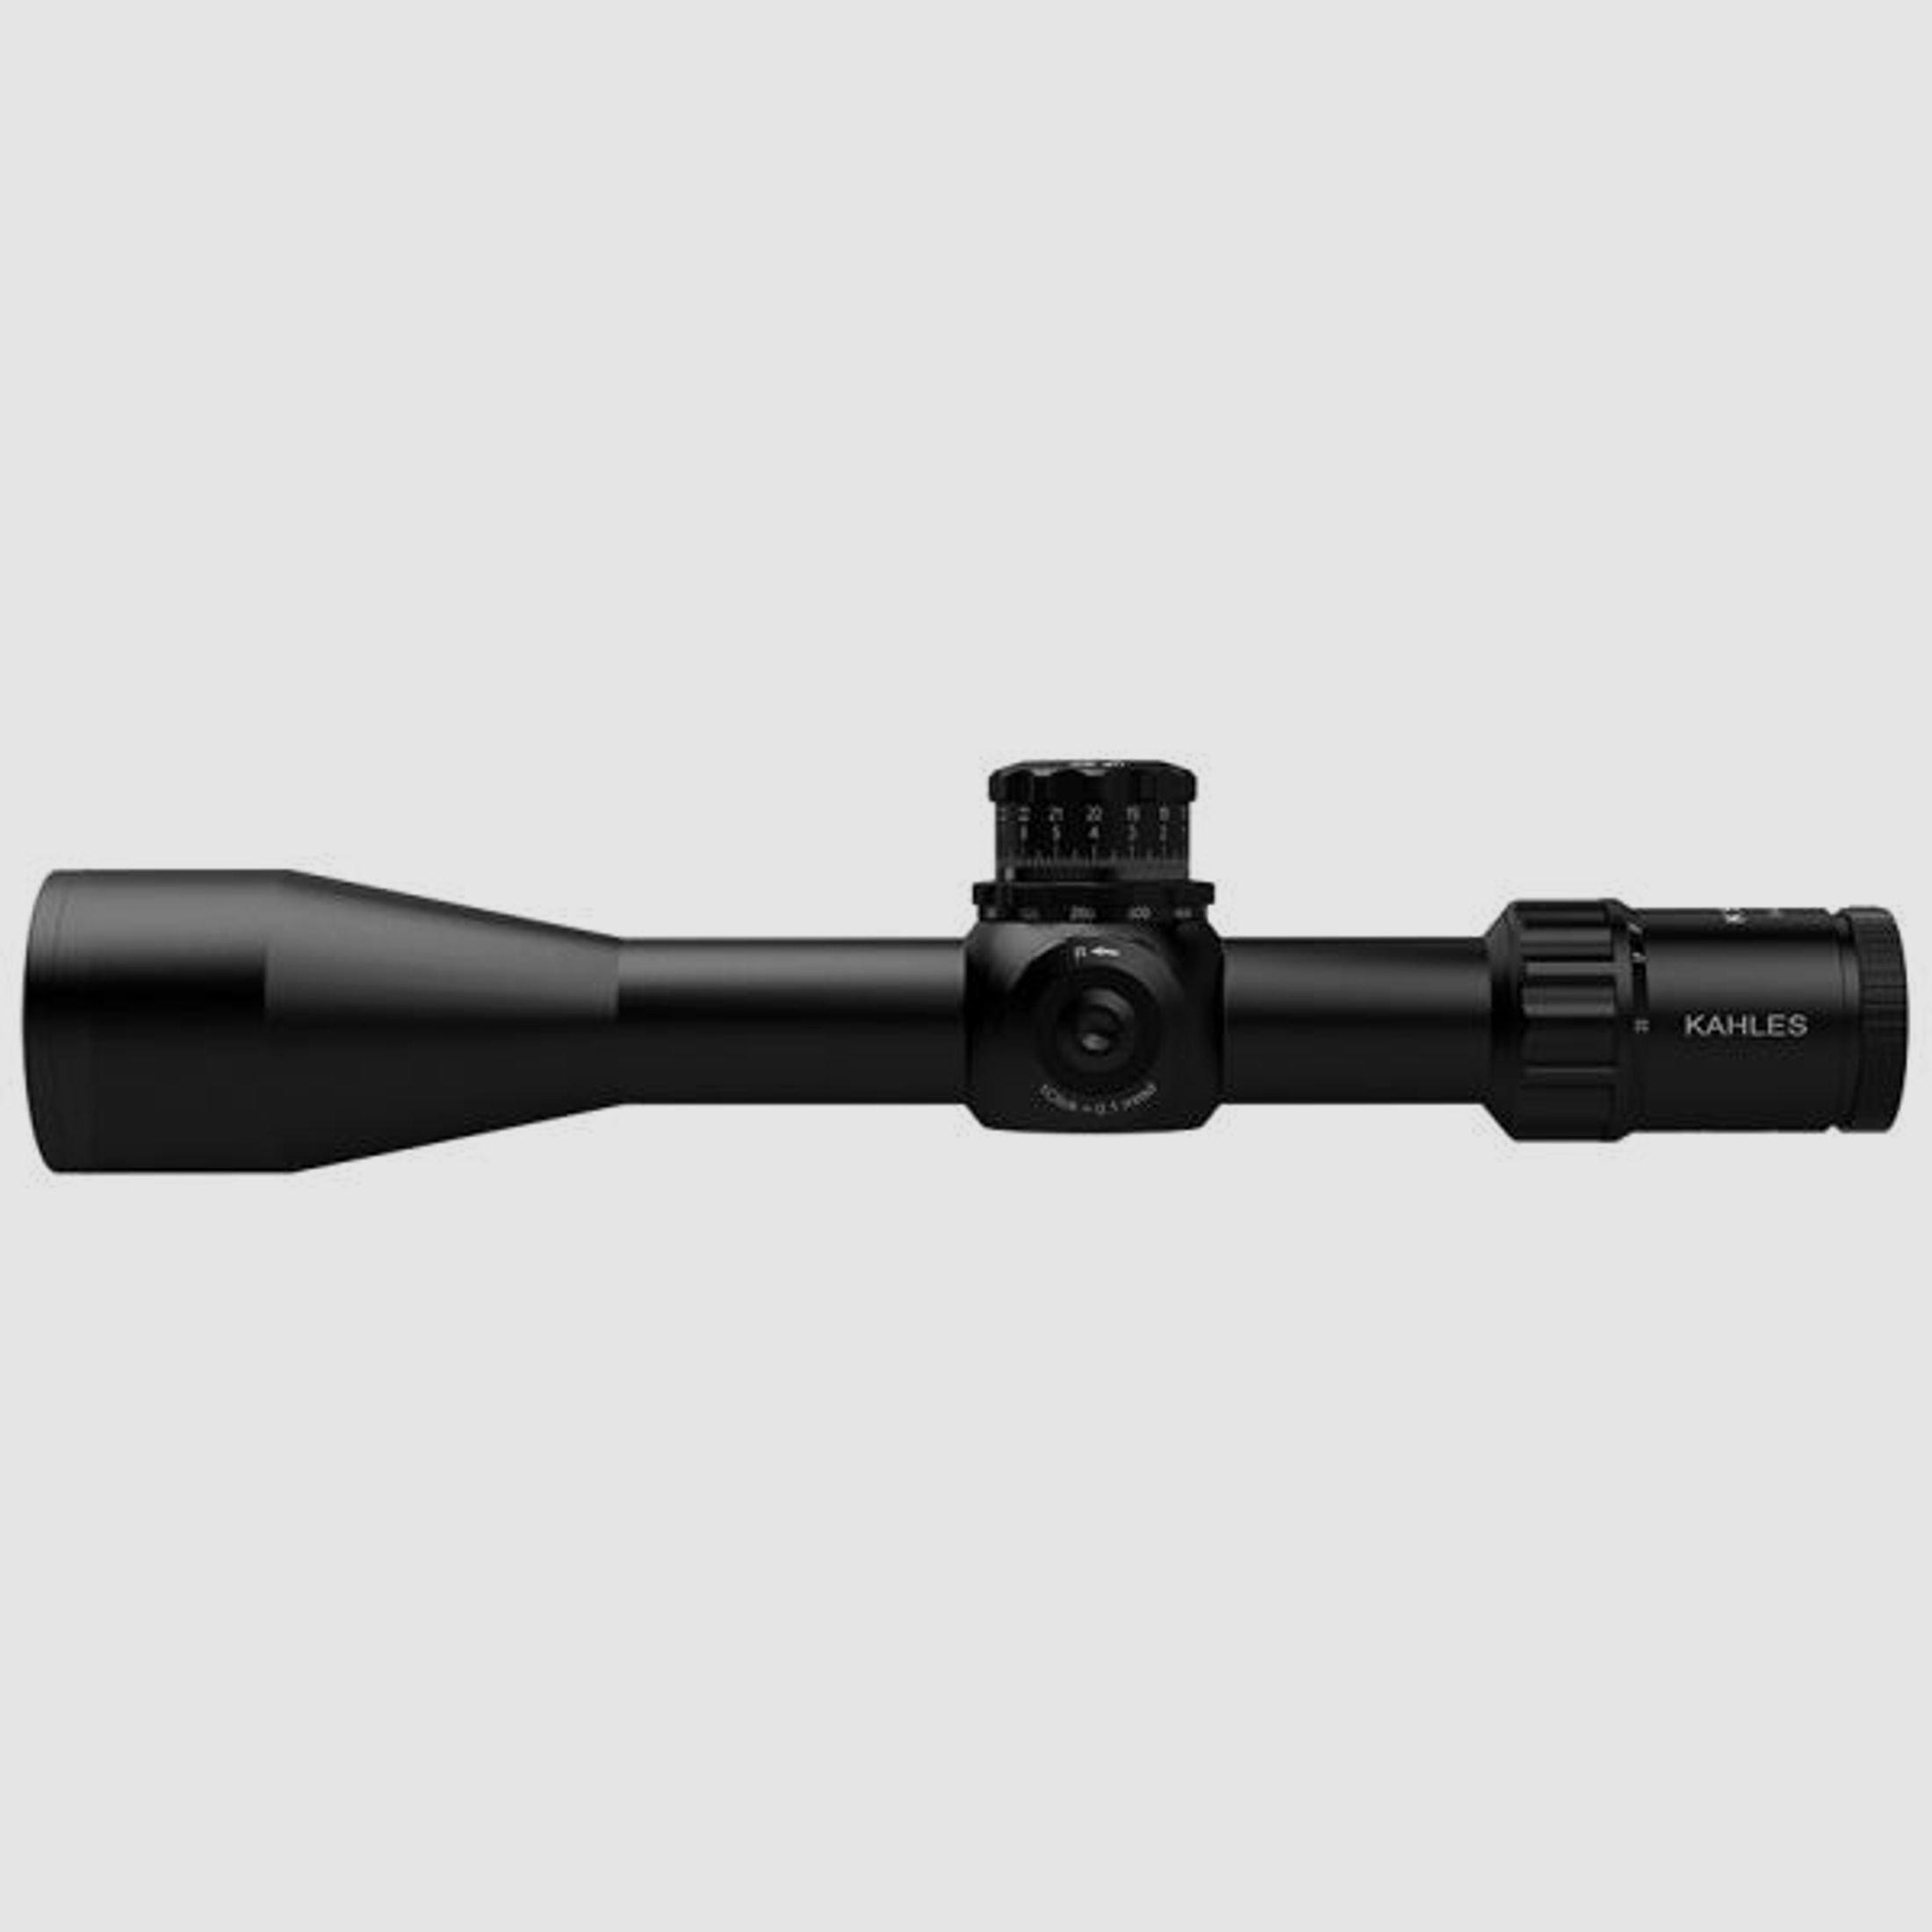 KAHLES ZF m. Leuchtabsehen (1. BE) 5-25x56 K525i ccw links Abs. SKMR   (34mm)